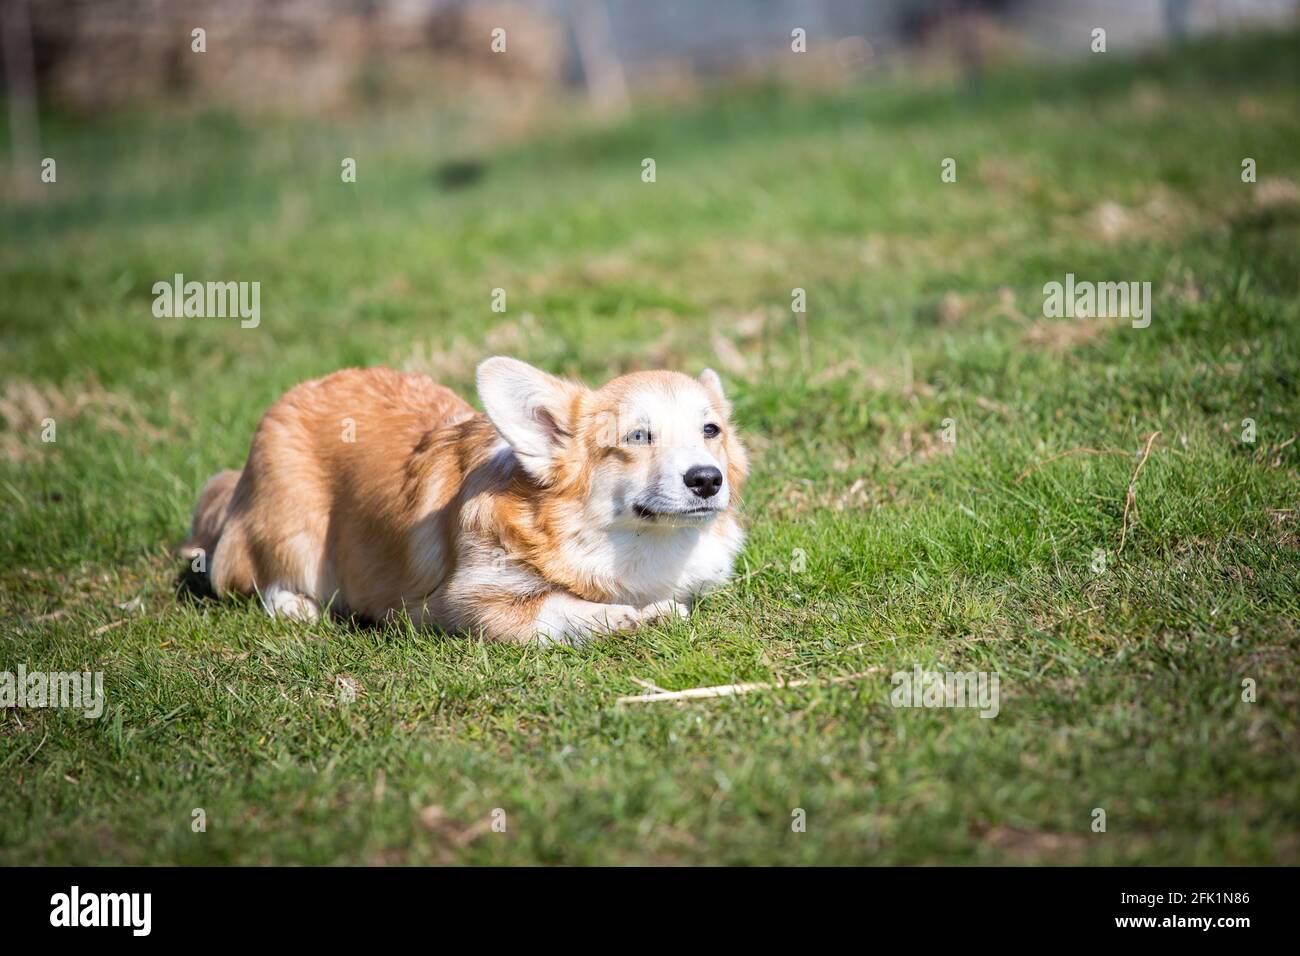 Welsh Corgi Pembroke creeping up to another dog to play Stock Photo